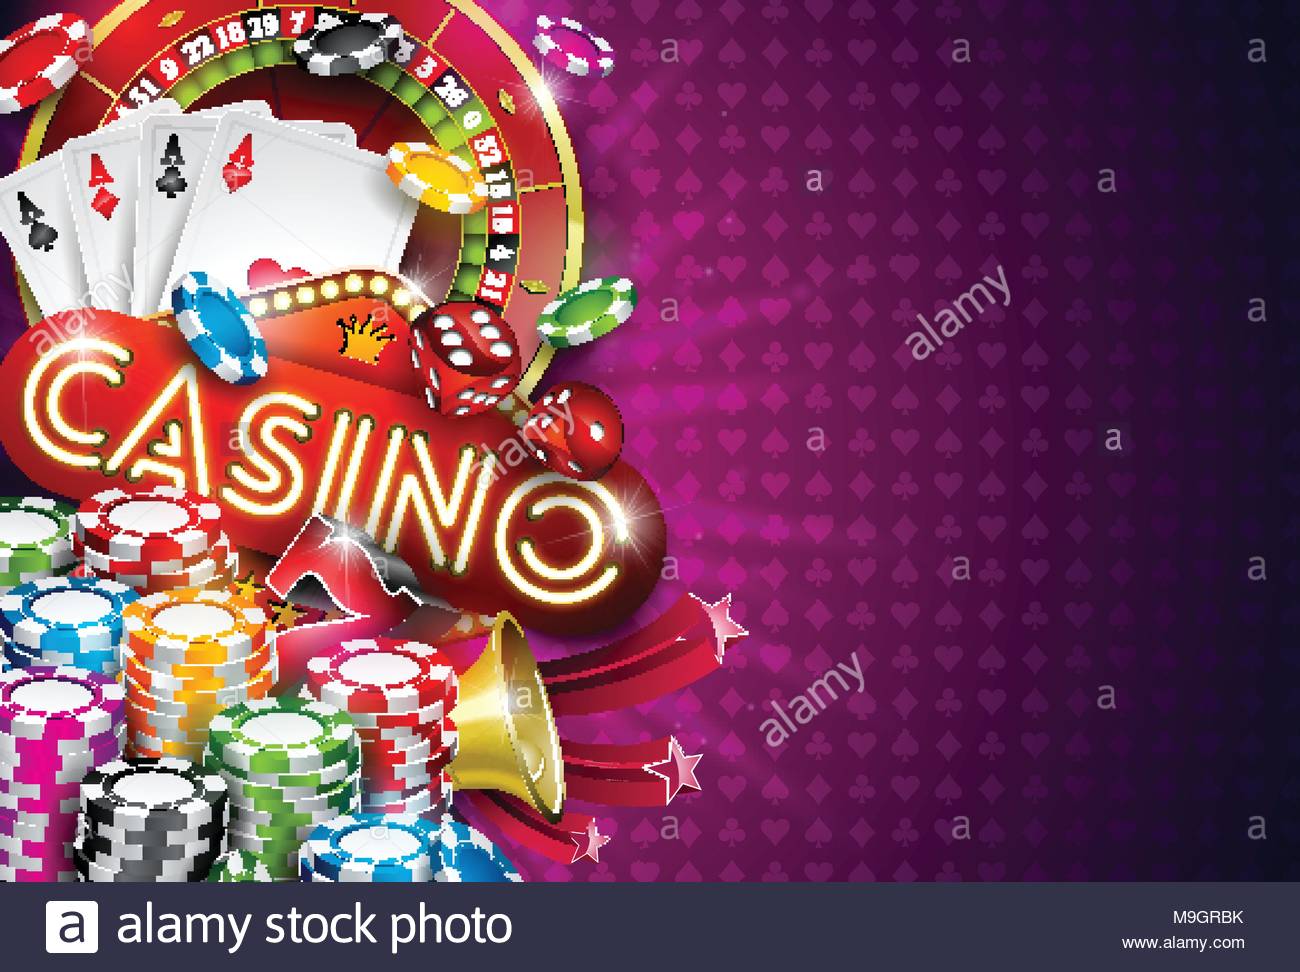 Casino Illustration With Roulette Wheel And Playing Chips On